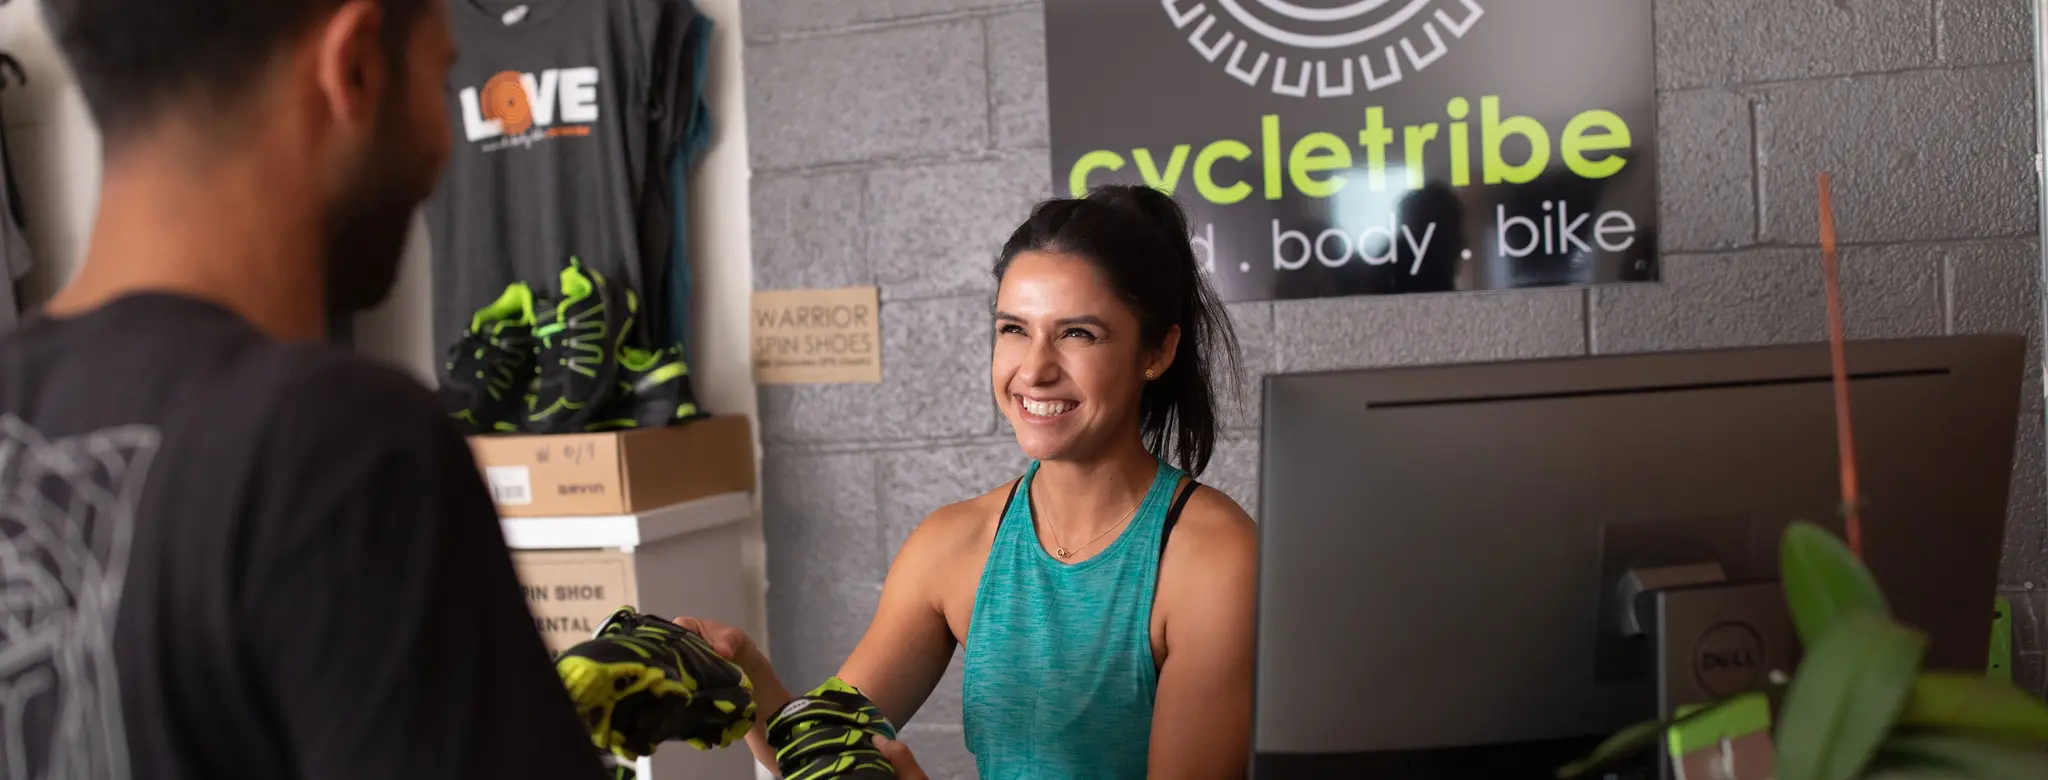 Woman at front desk helps man check into Cycletribe studio.